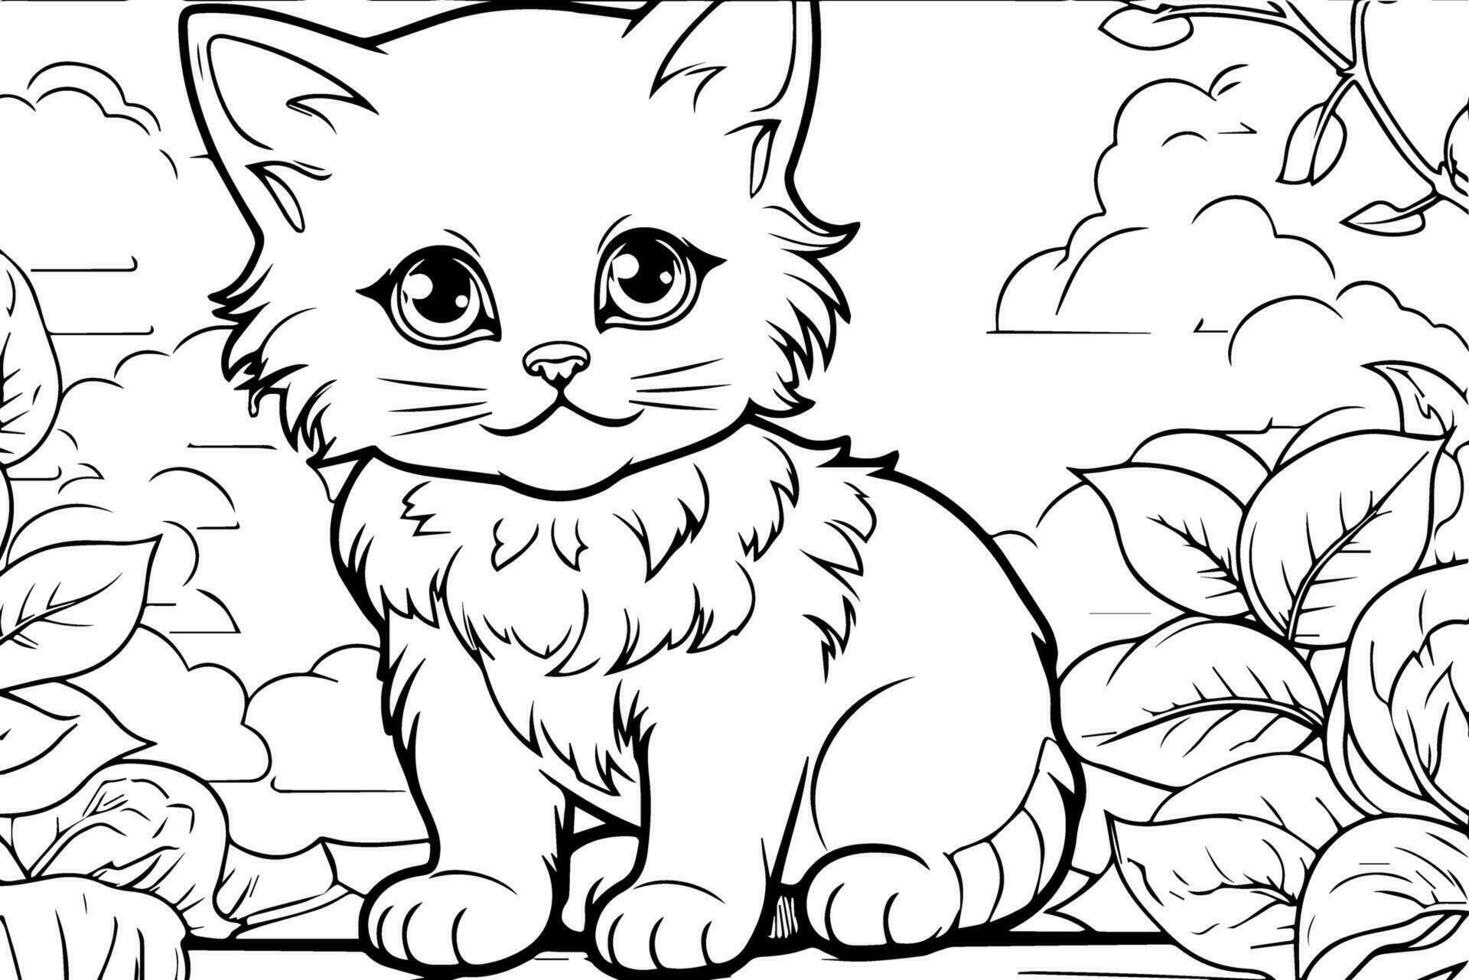 https://static.vecteezy.com/system/resources/previews/025/659/998/non_2x/coloring-book-for-children-antistress-coloring-book-kitten-line-art-coloring-graphics-outline-animals-cat-kitten-free-vector.jpg